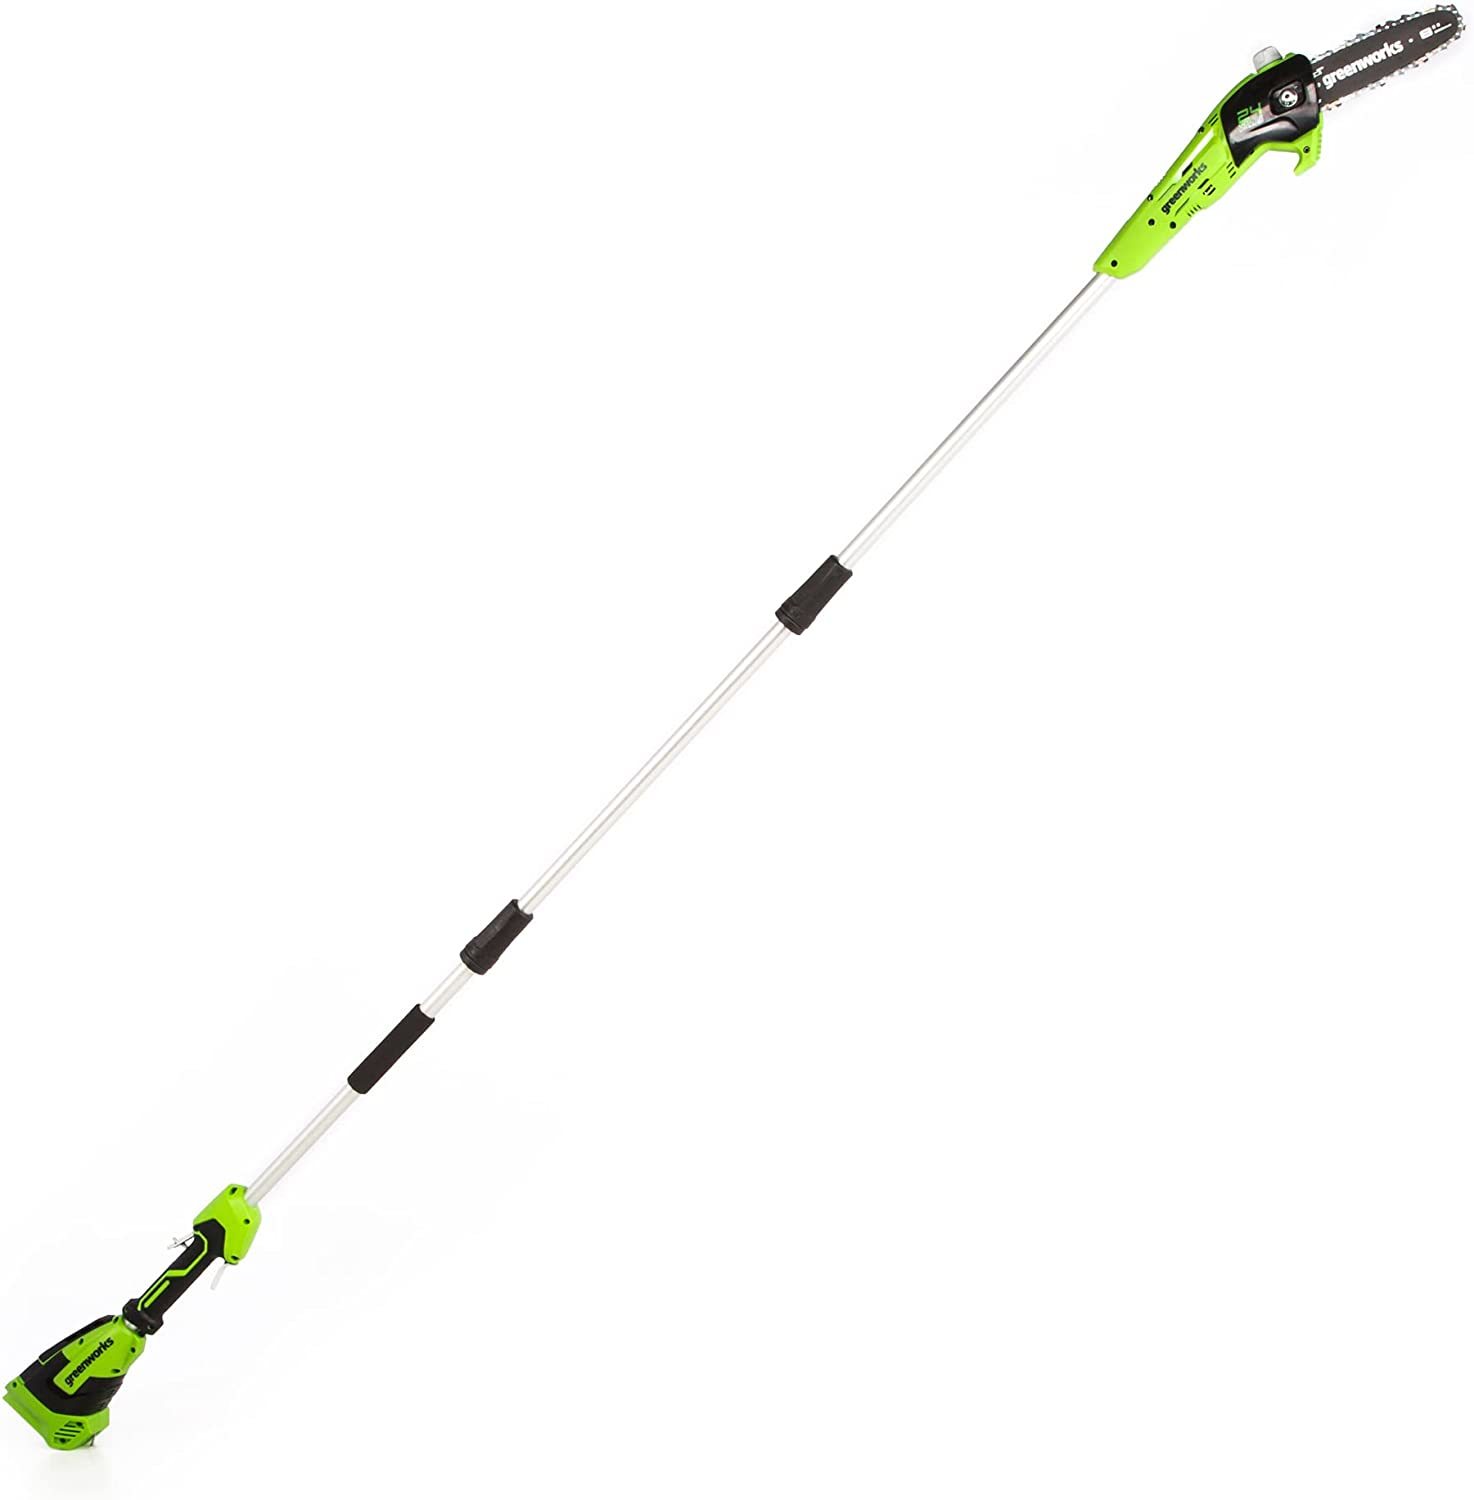 Primary image for Greenworks 24V 8-inch Cordless Pole Saw, Tool Only, PS24B00